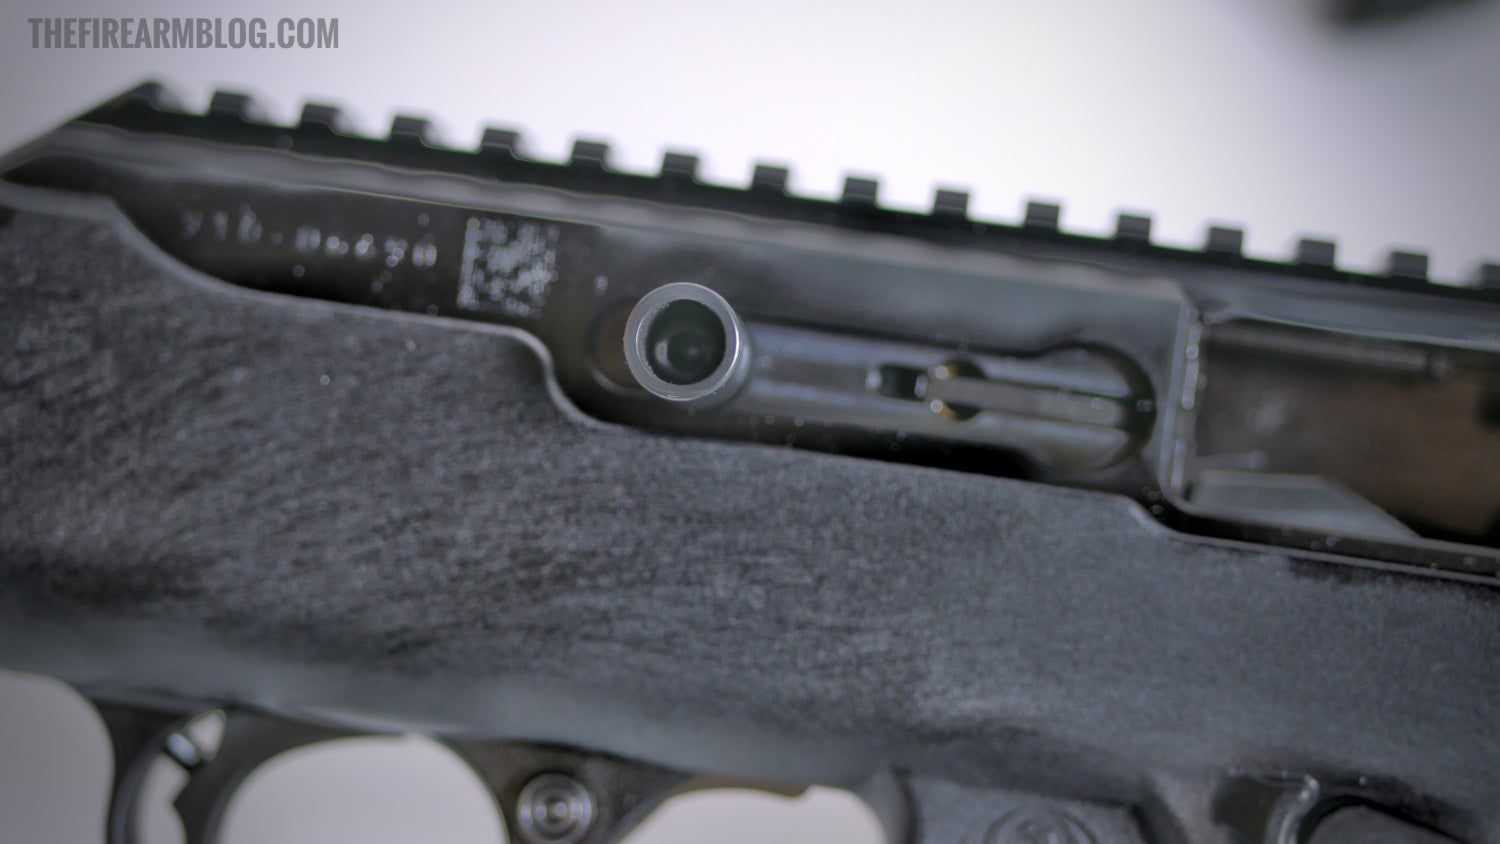 TFB REVIEW: Ruger PC Carbine